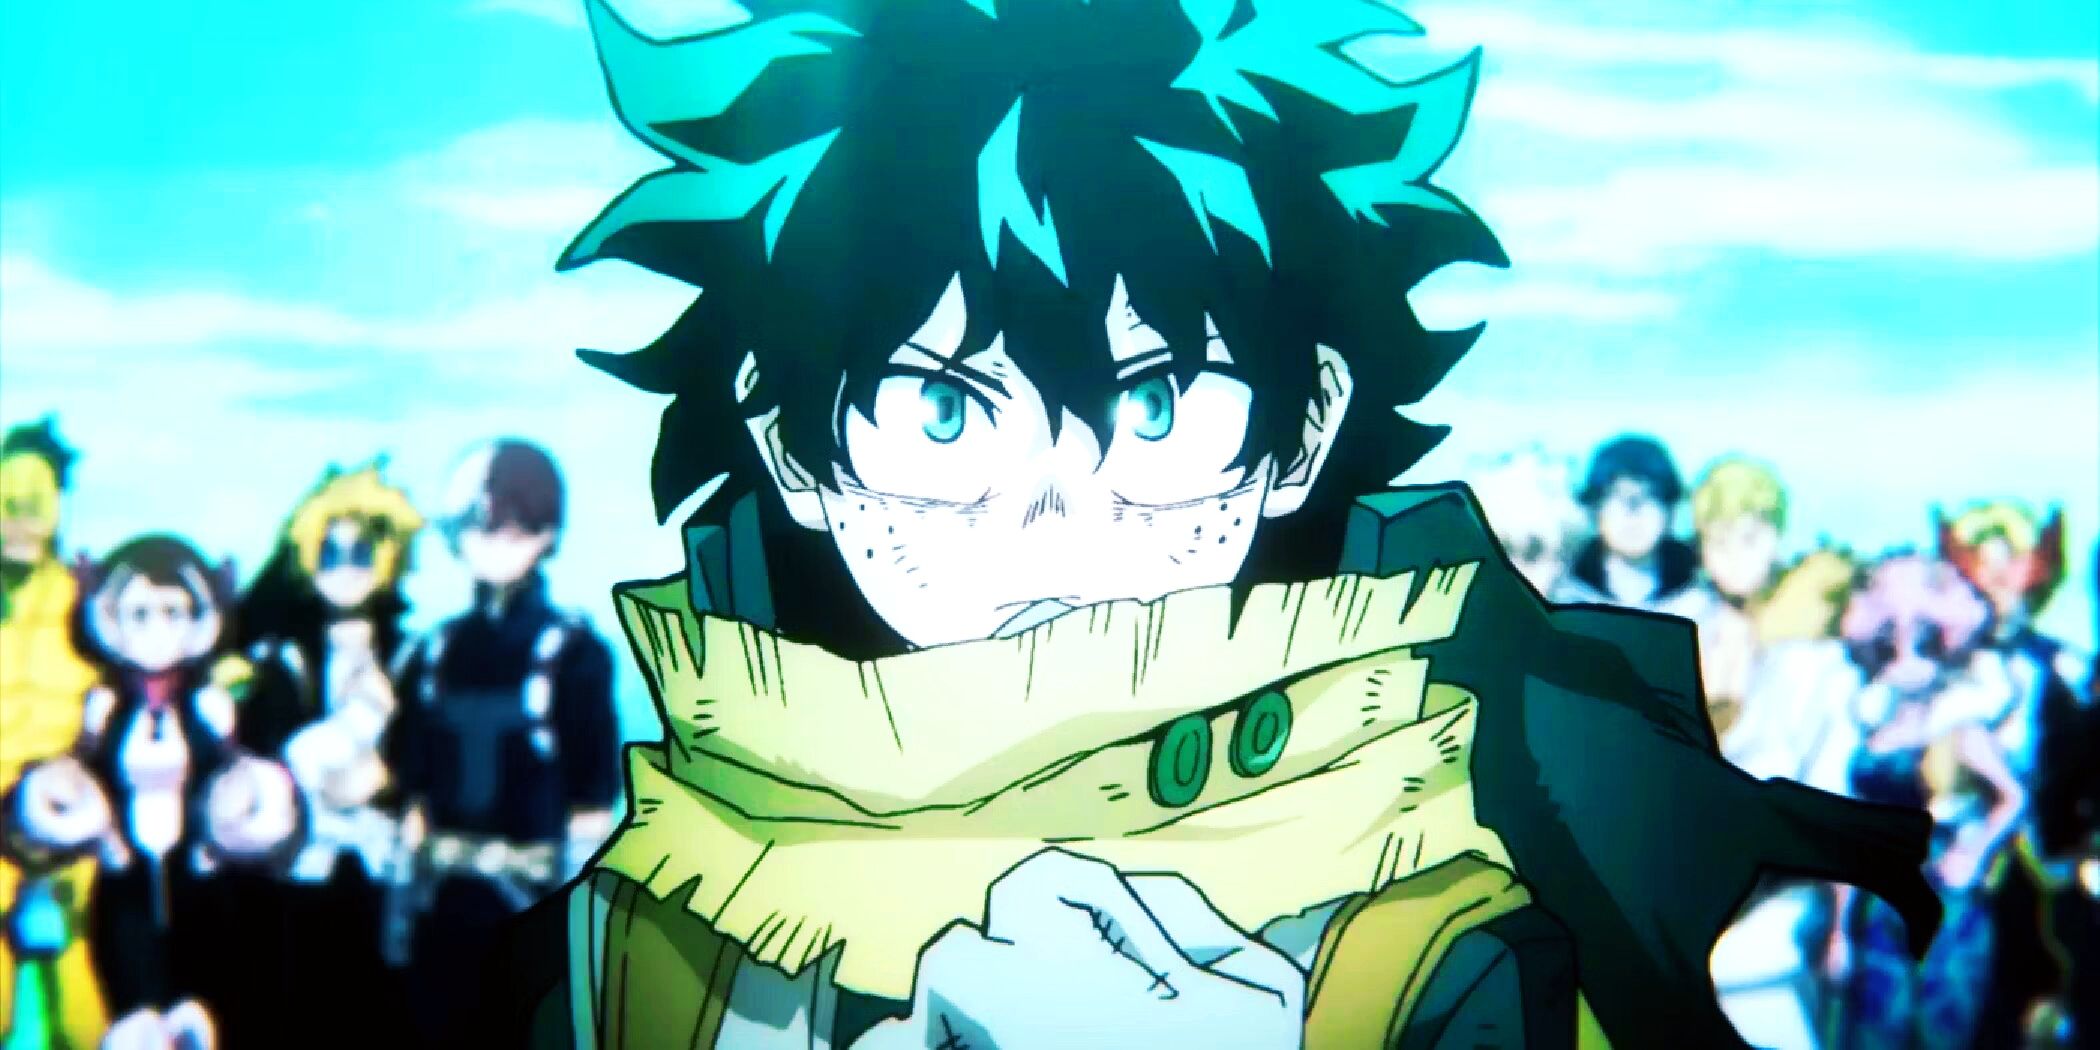 Deku clenching his fist in front of his friends during My Hero Academia's final war.